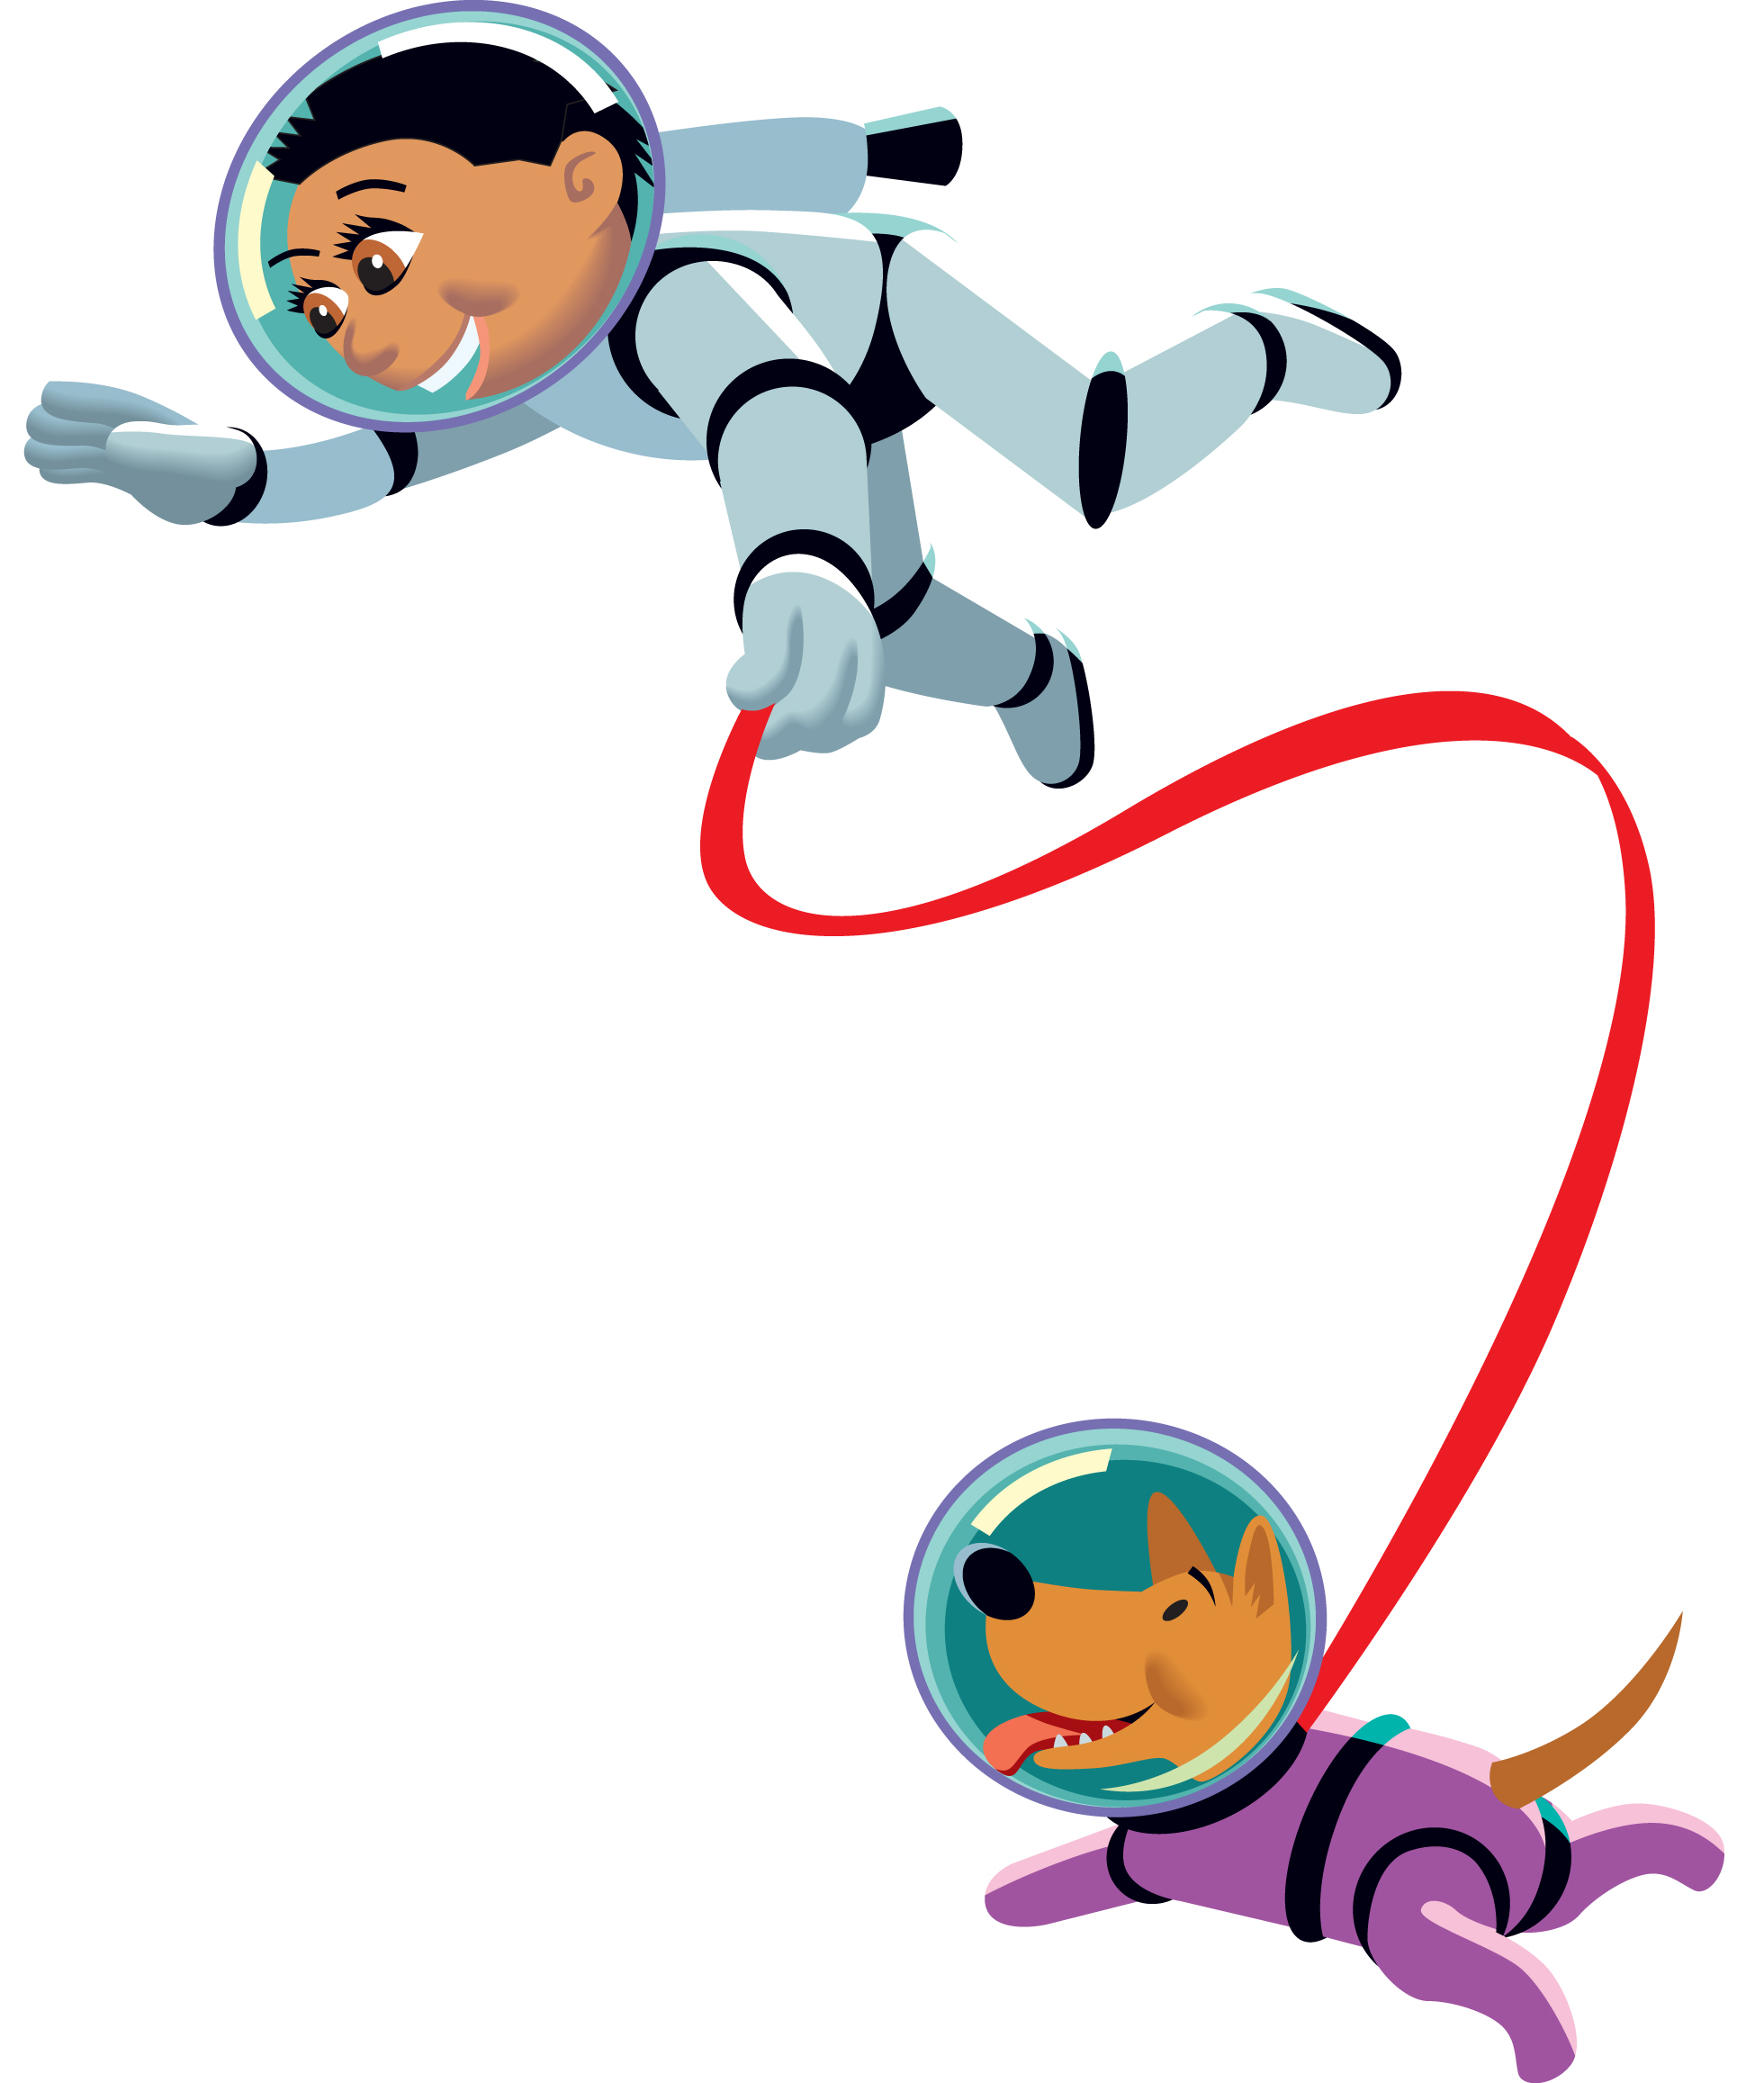 Astronaut Clip Art For Children Images  Pictures - Becuo